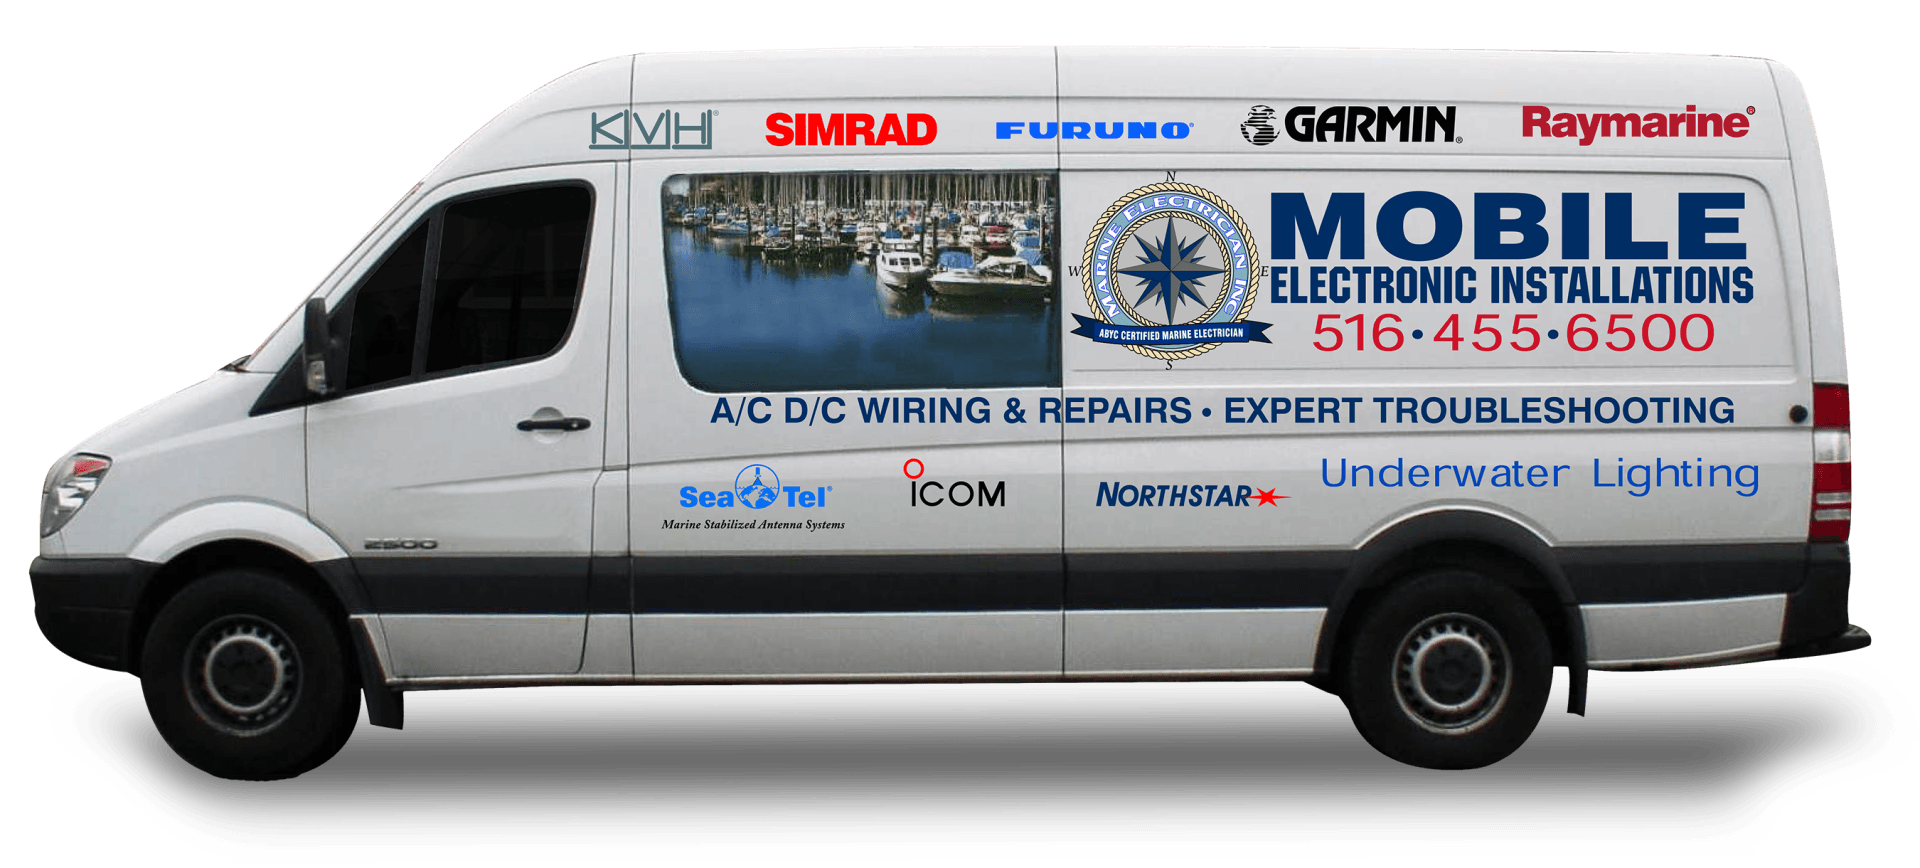 Marine Electrician Inc - Boat Electronics, Marine Electrical Troubleshooting Electrician Repair & Services | Nassau County, NY